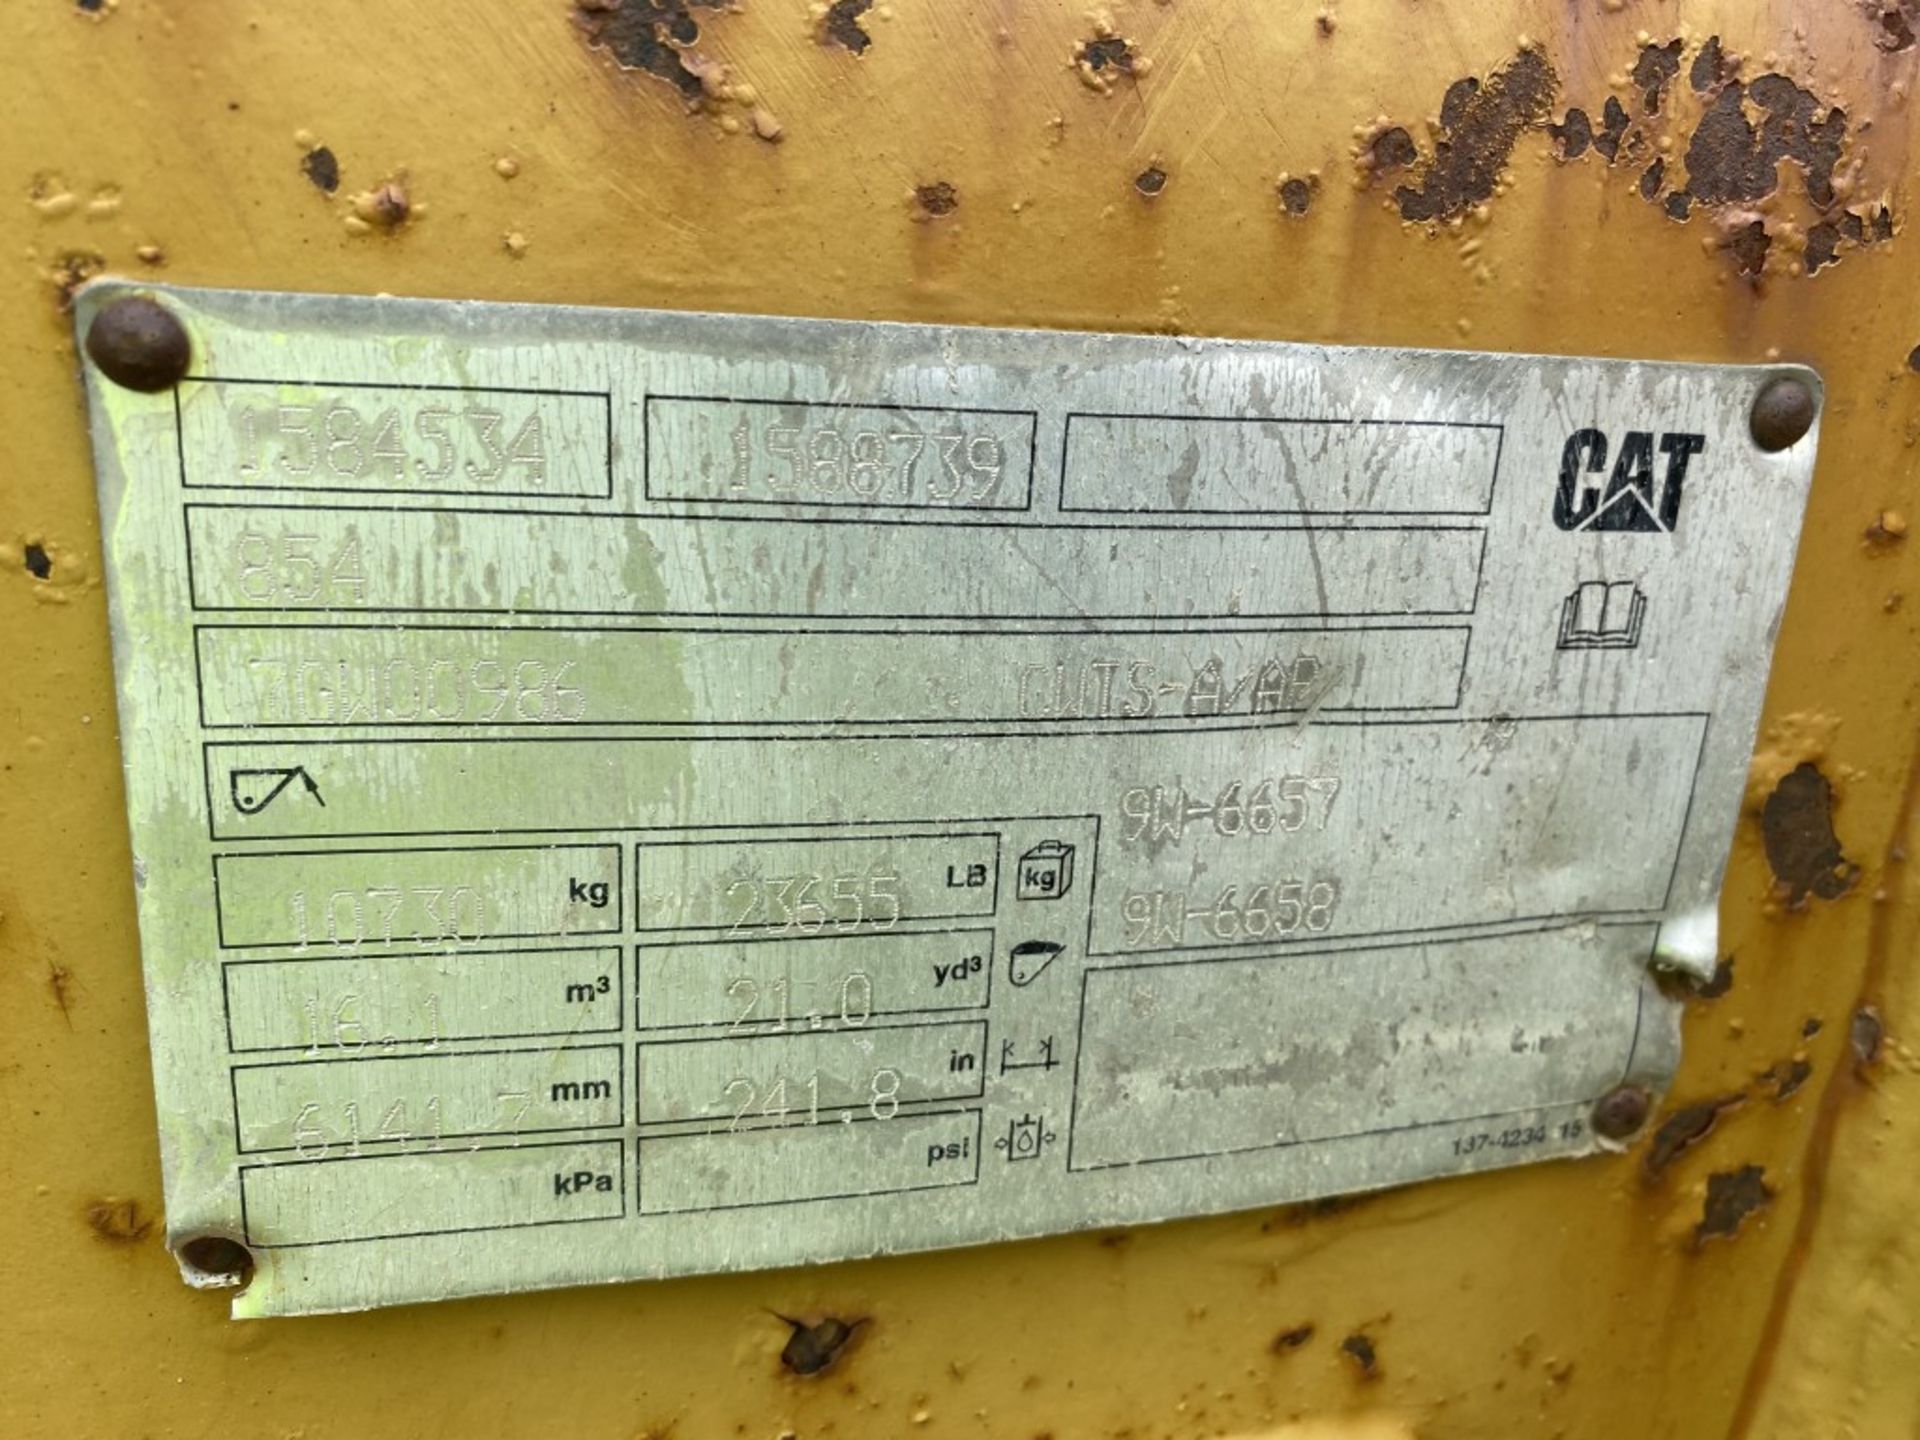 CATERPILLAR DOZER BLADE, 241.8'', S/N: 7GW00986, COMES WITH ASSORTED USED EQUIPMENT PARTS - Image 4 of 19